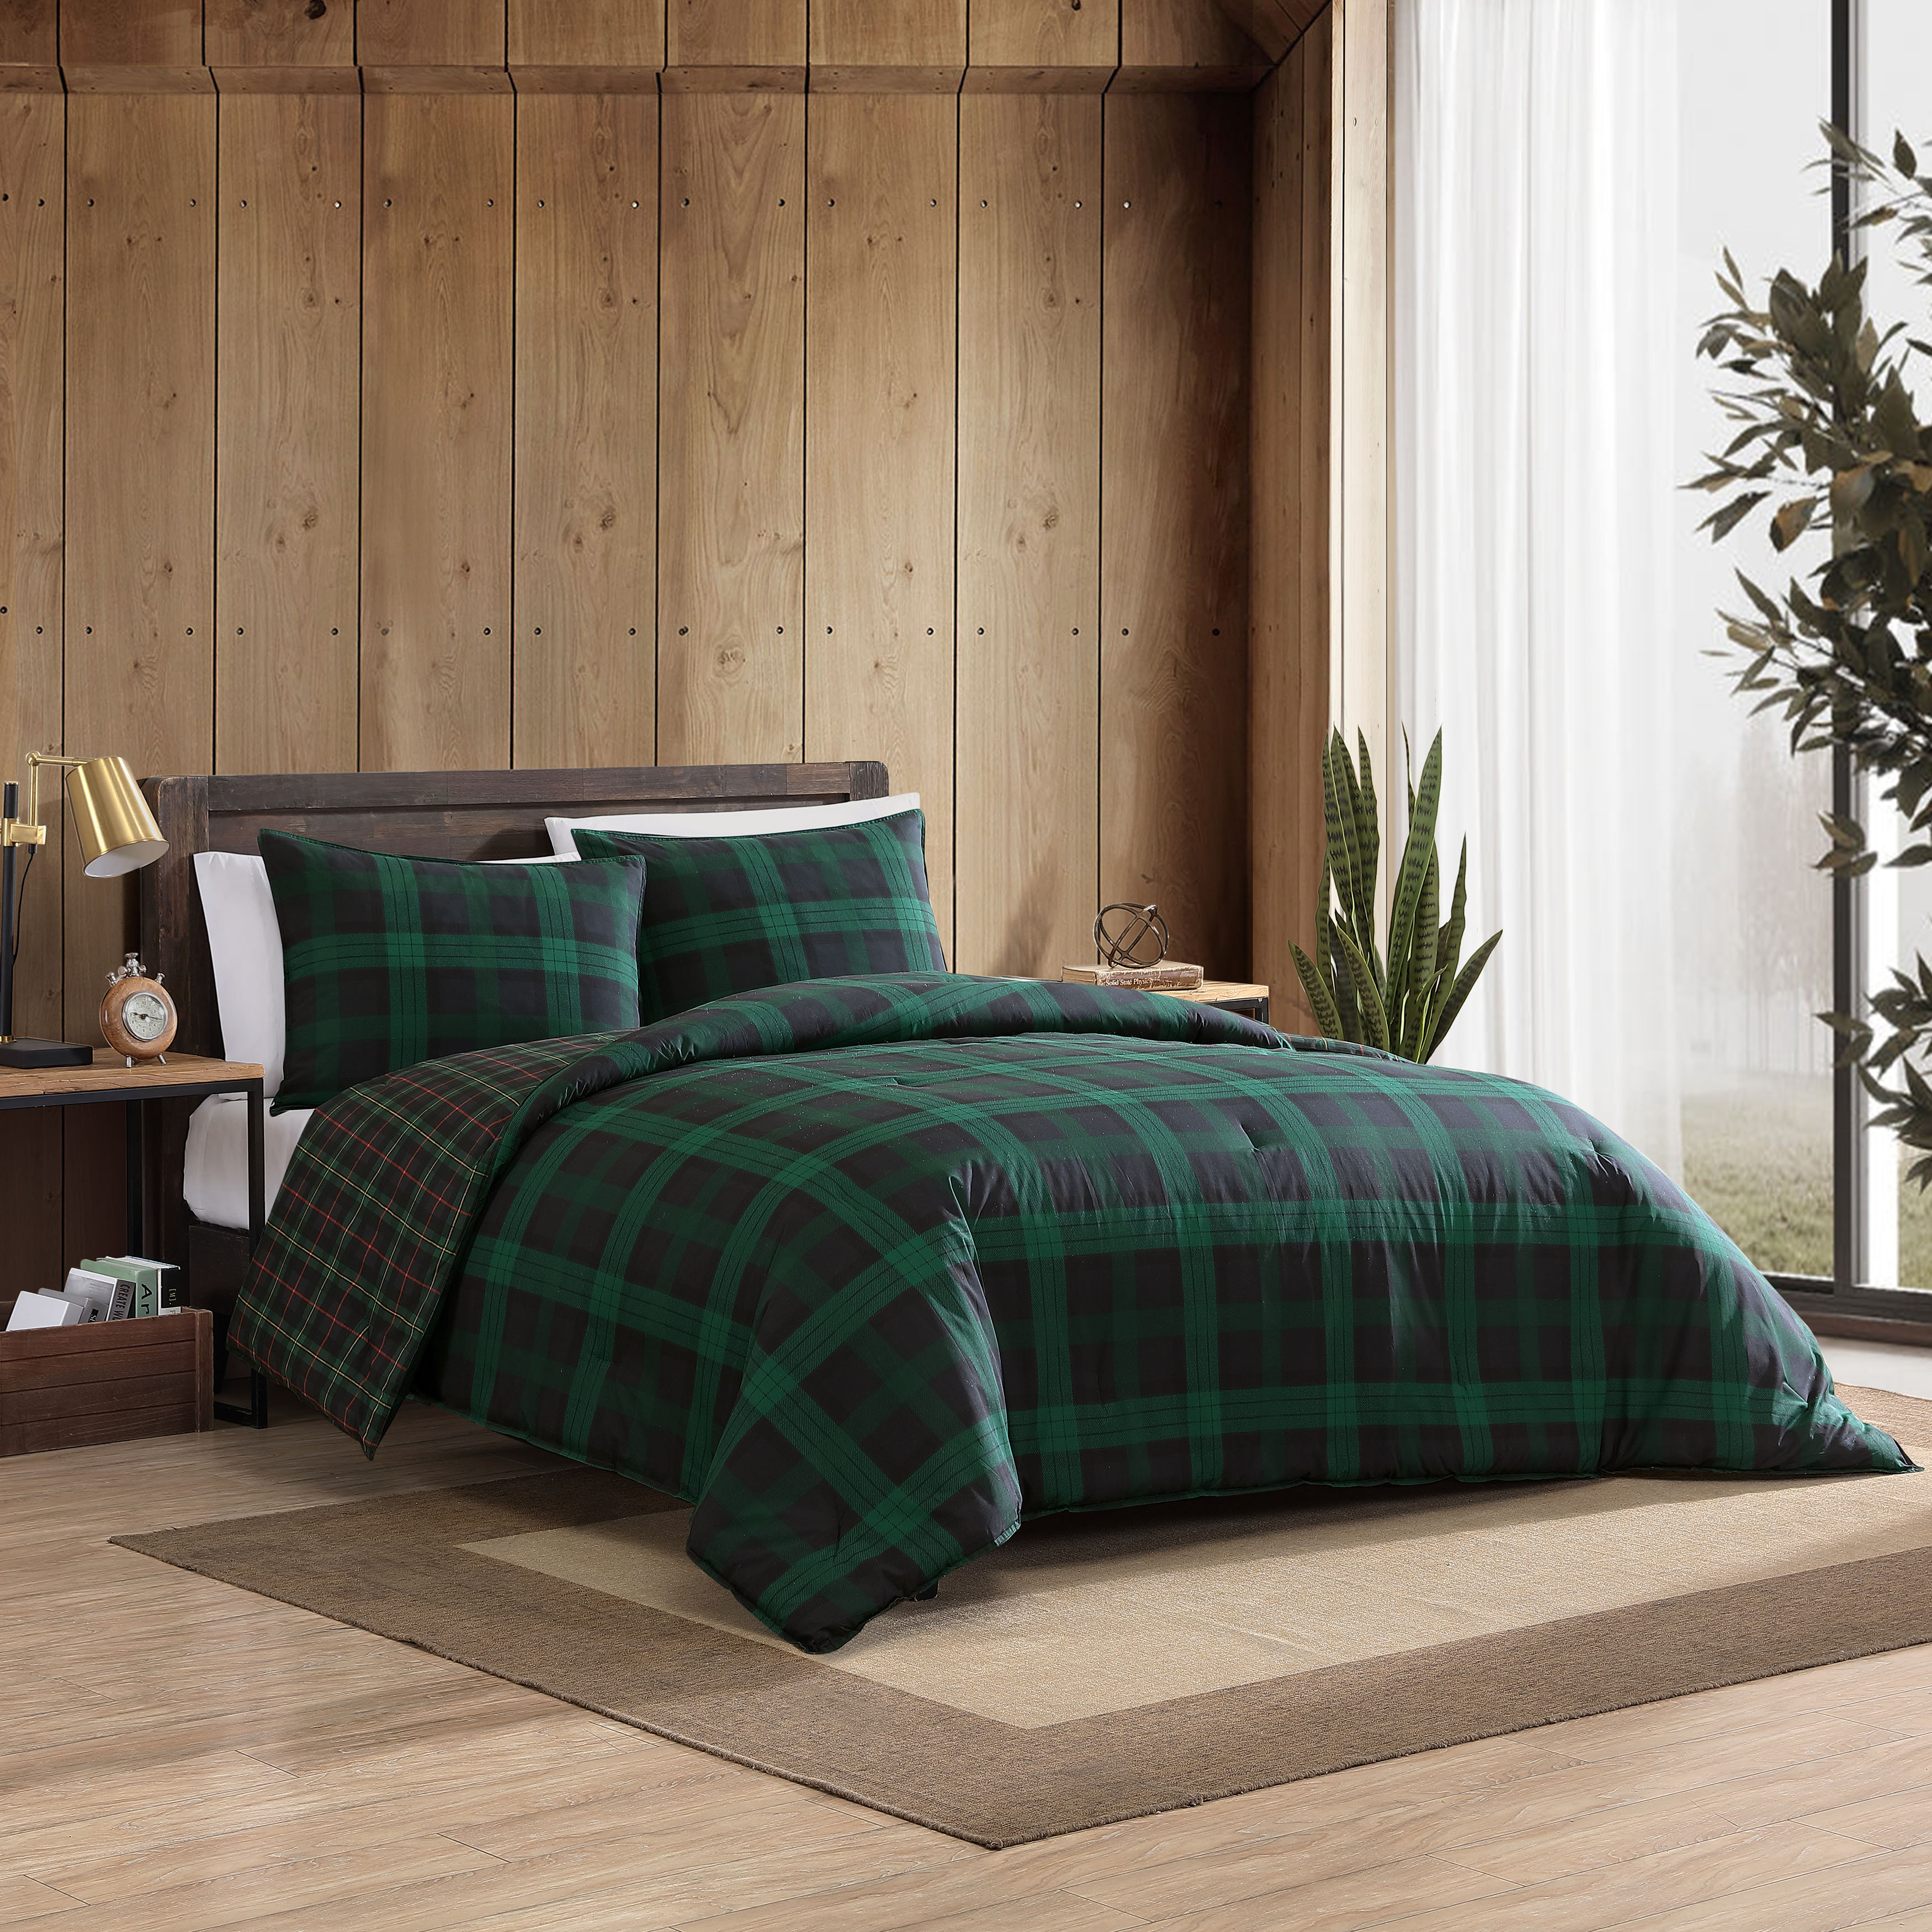 Hunter Green and Dark Navy Plaid Cotton Flannel Fabric – Nature's